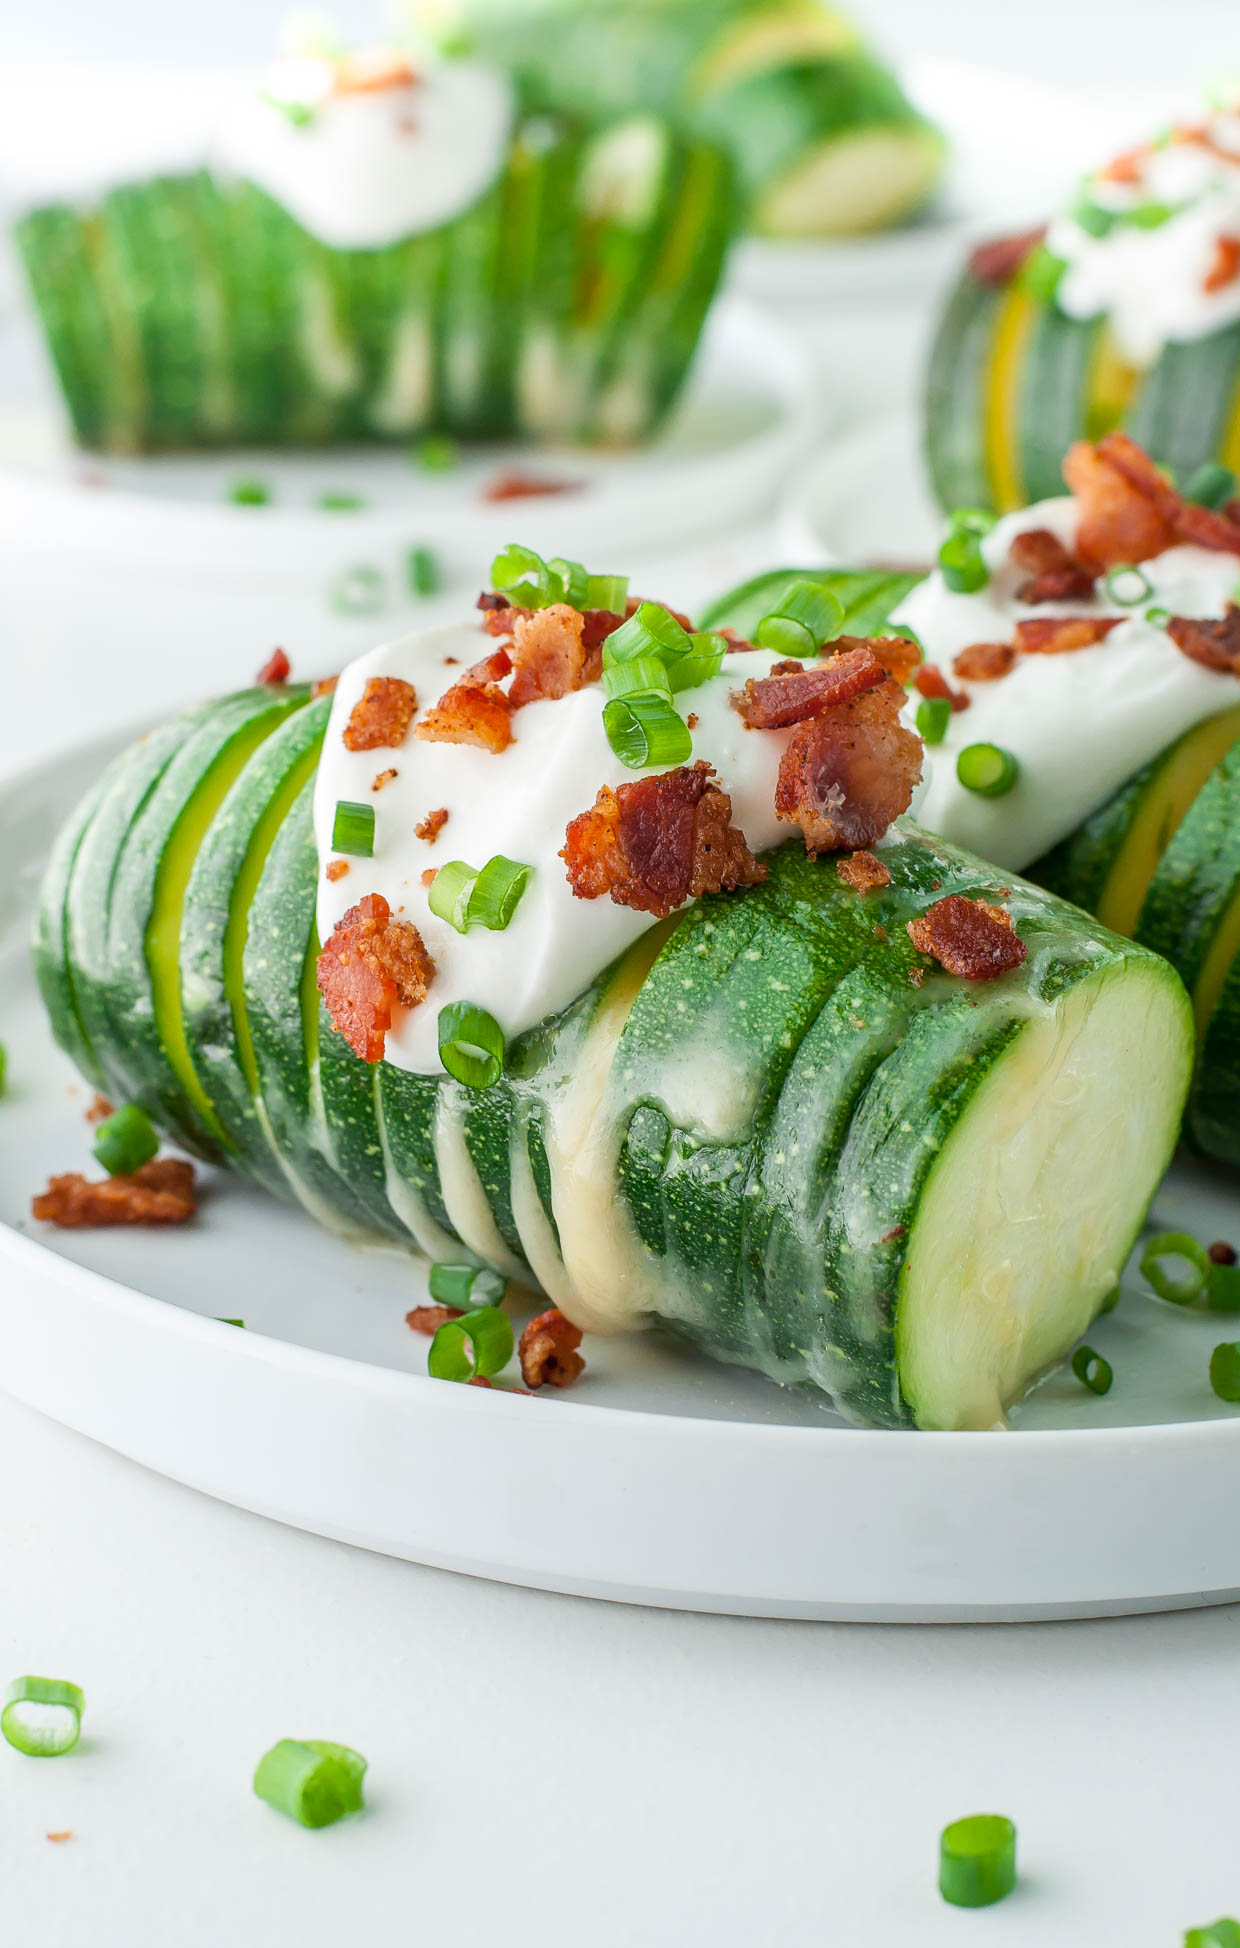 Fully Loaded Hasselback Zucchini - basically all my zucchini dreams have just come true! DELICIOUS + super easy to make